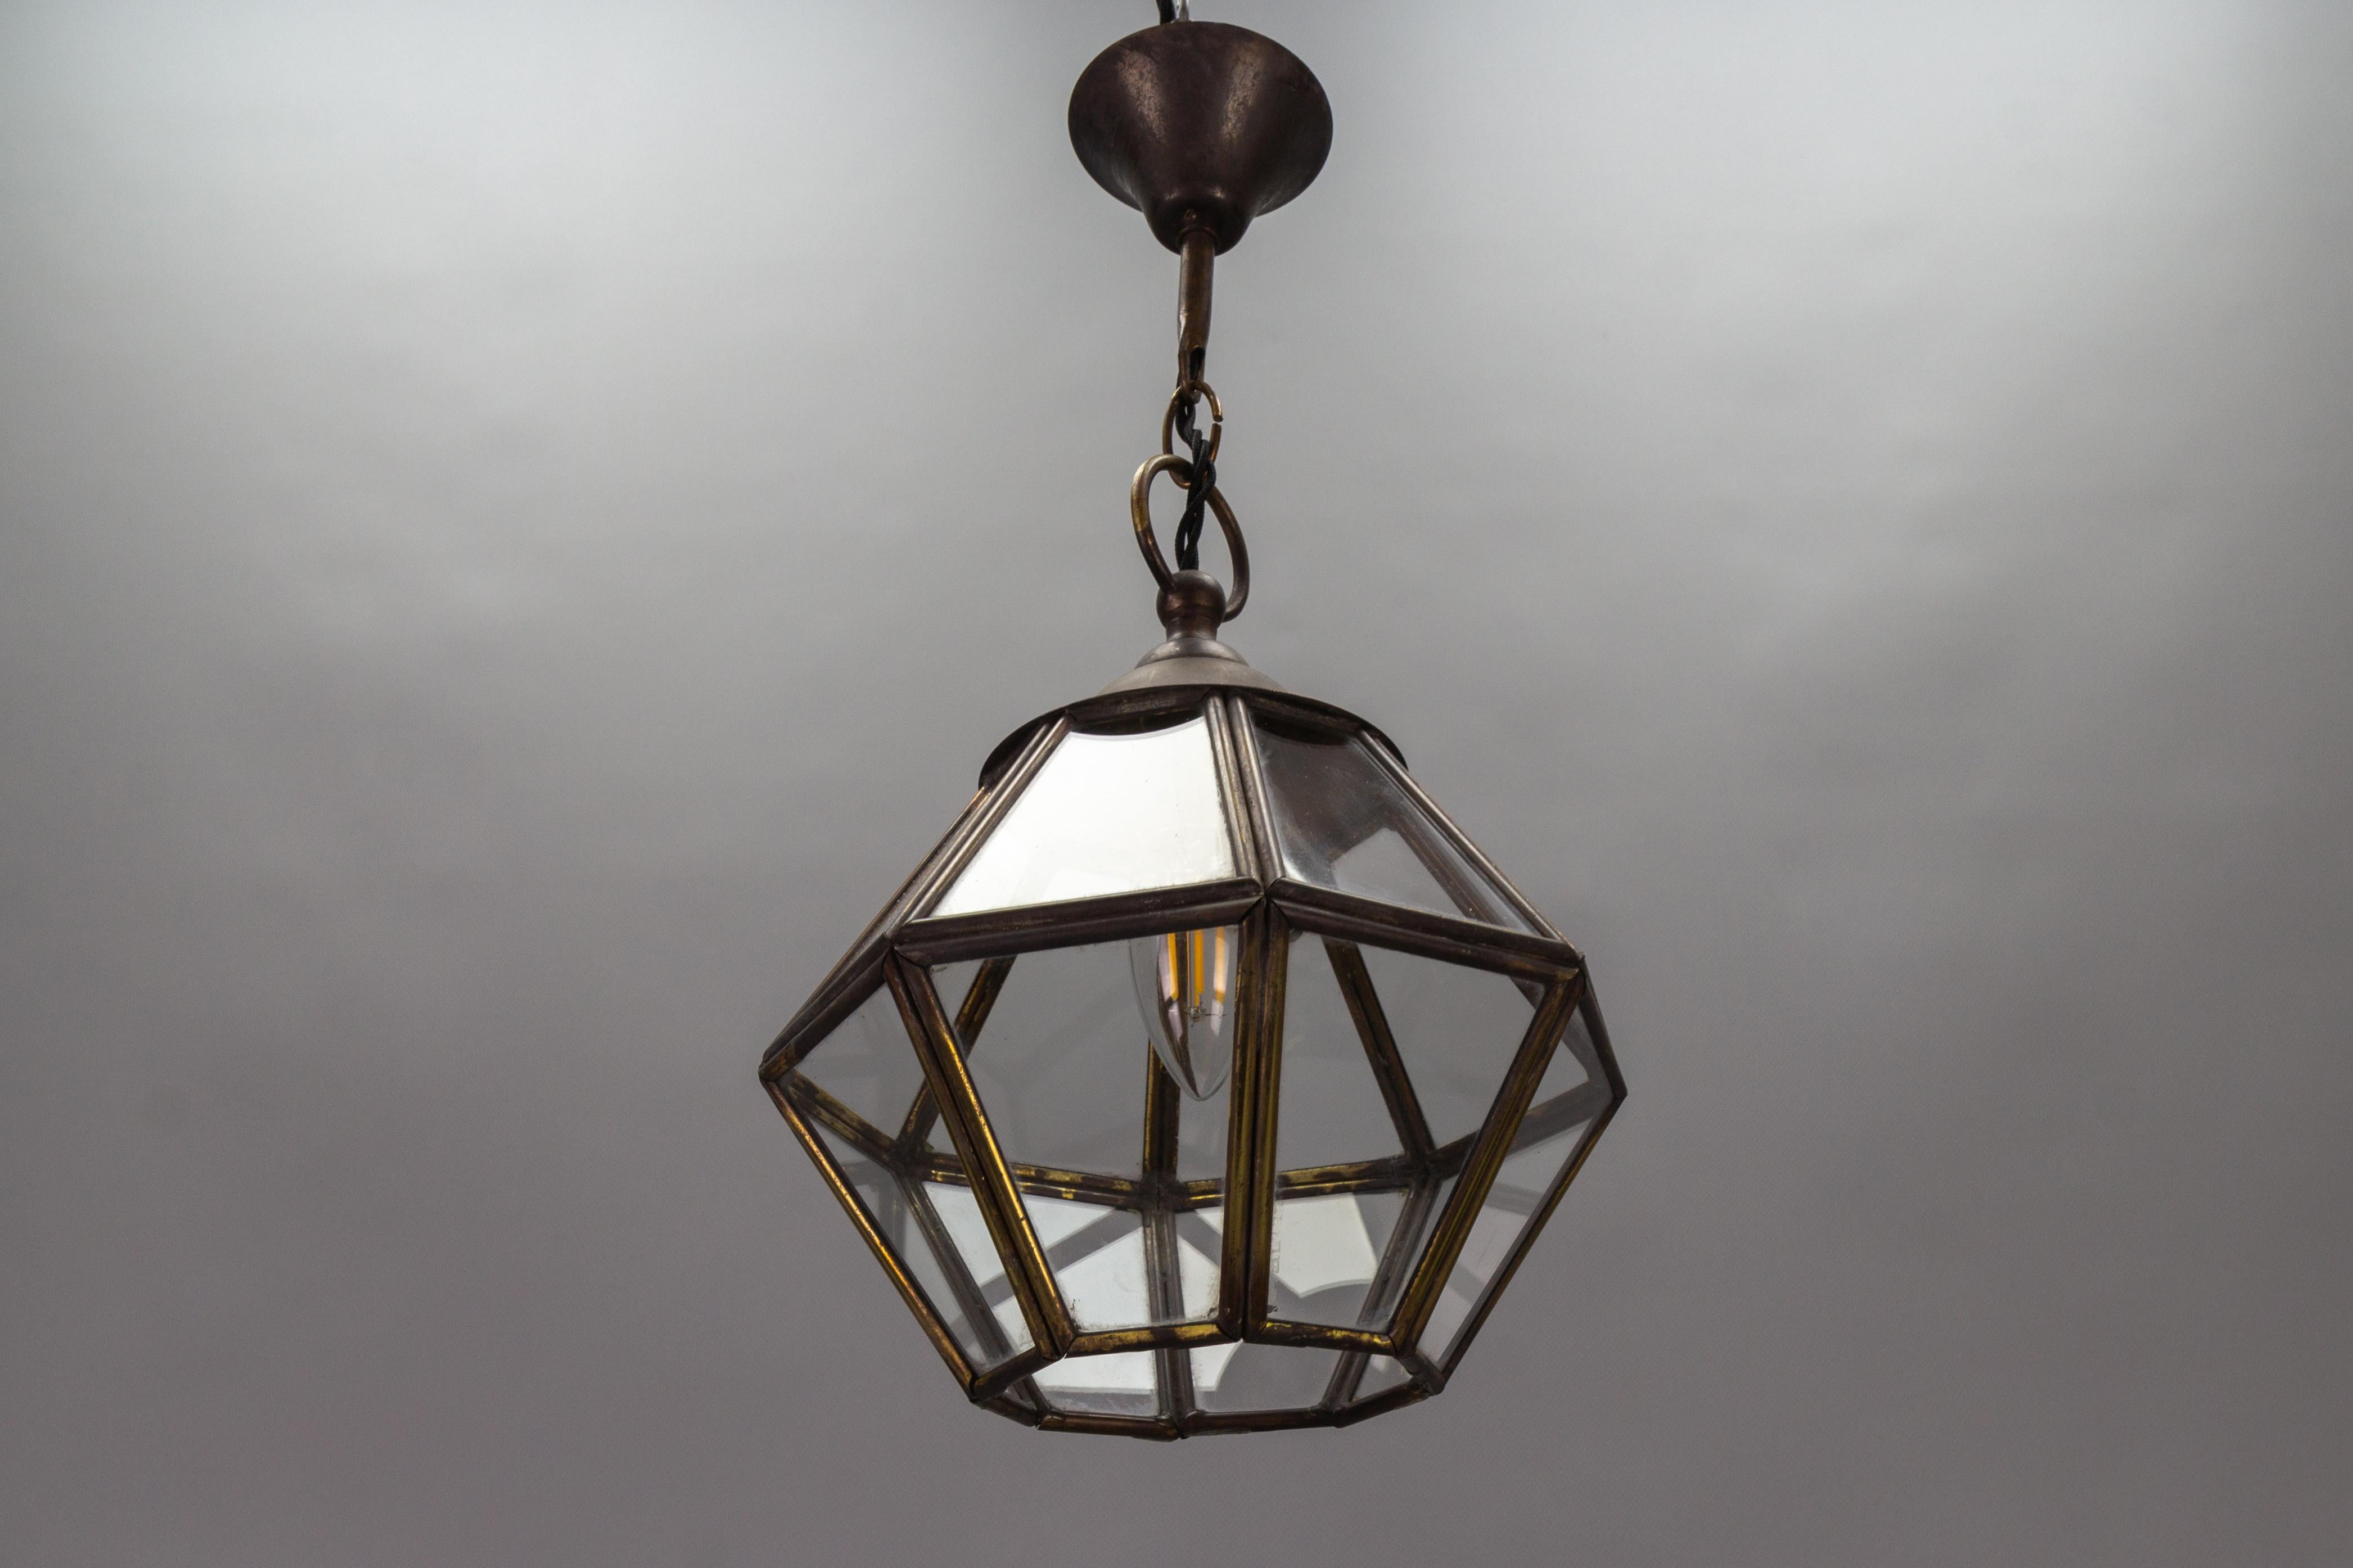 French Midcentury-Modern Brass and Clear Glass Octagonal Hanging Lantern For Sale 1